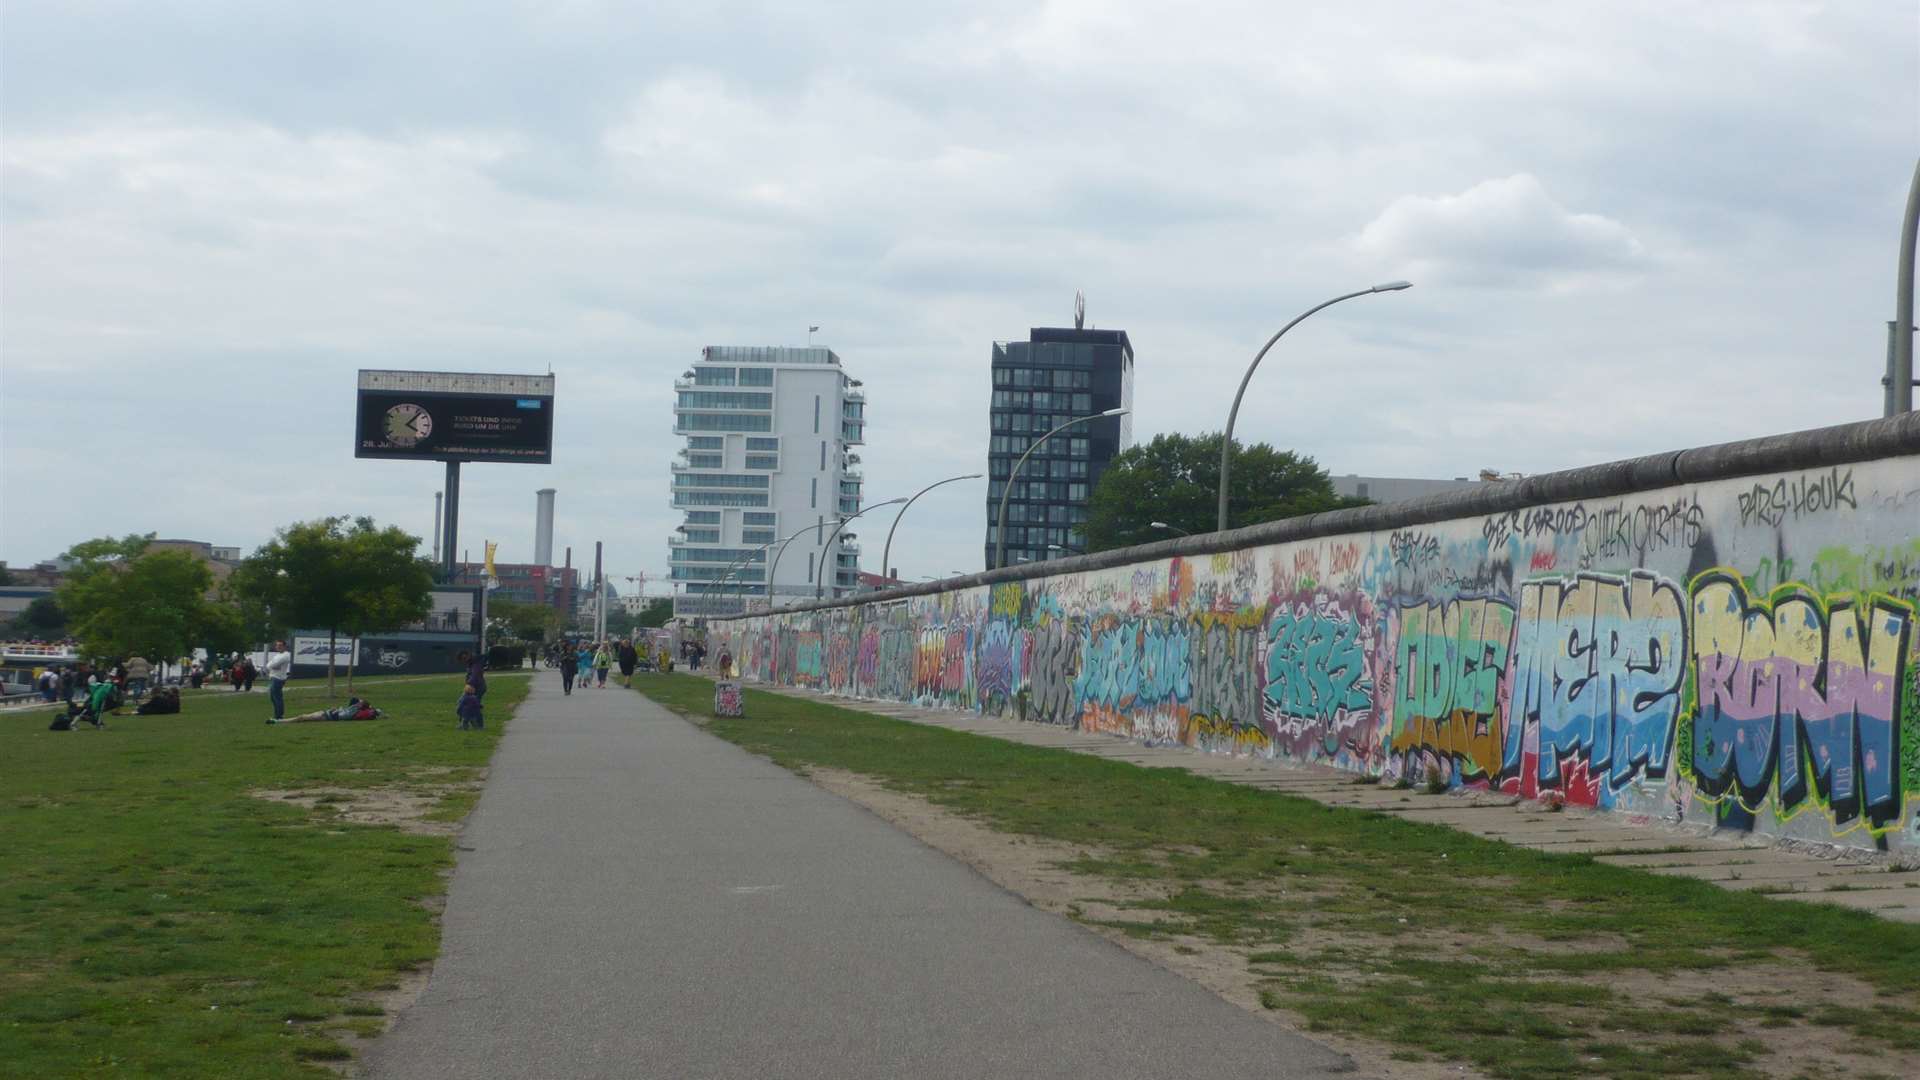 Remnants of The Wall at the East Side Gallery